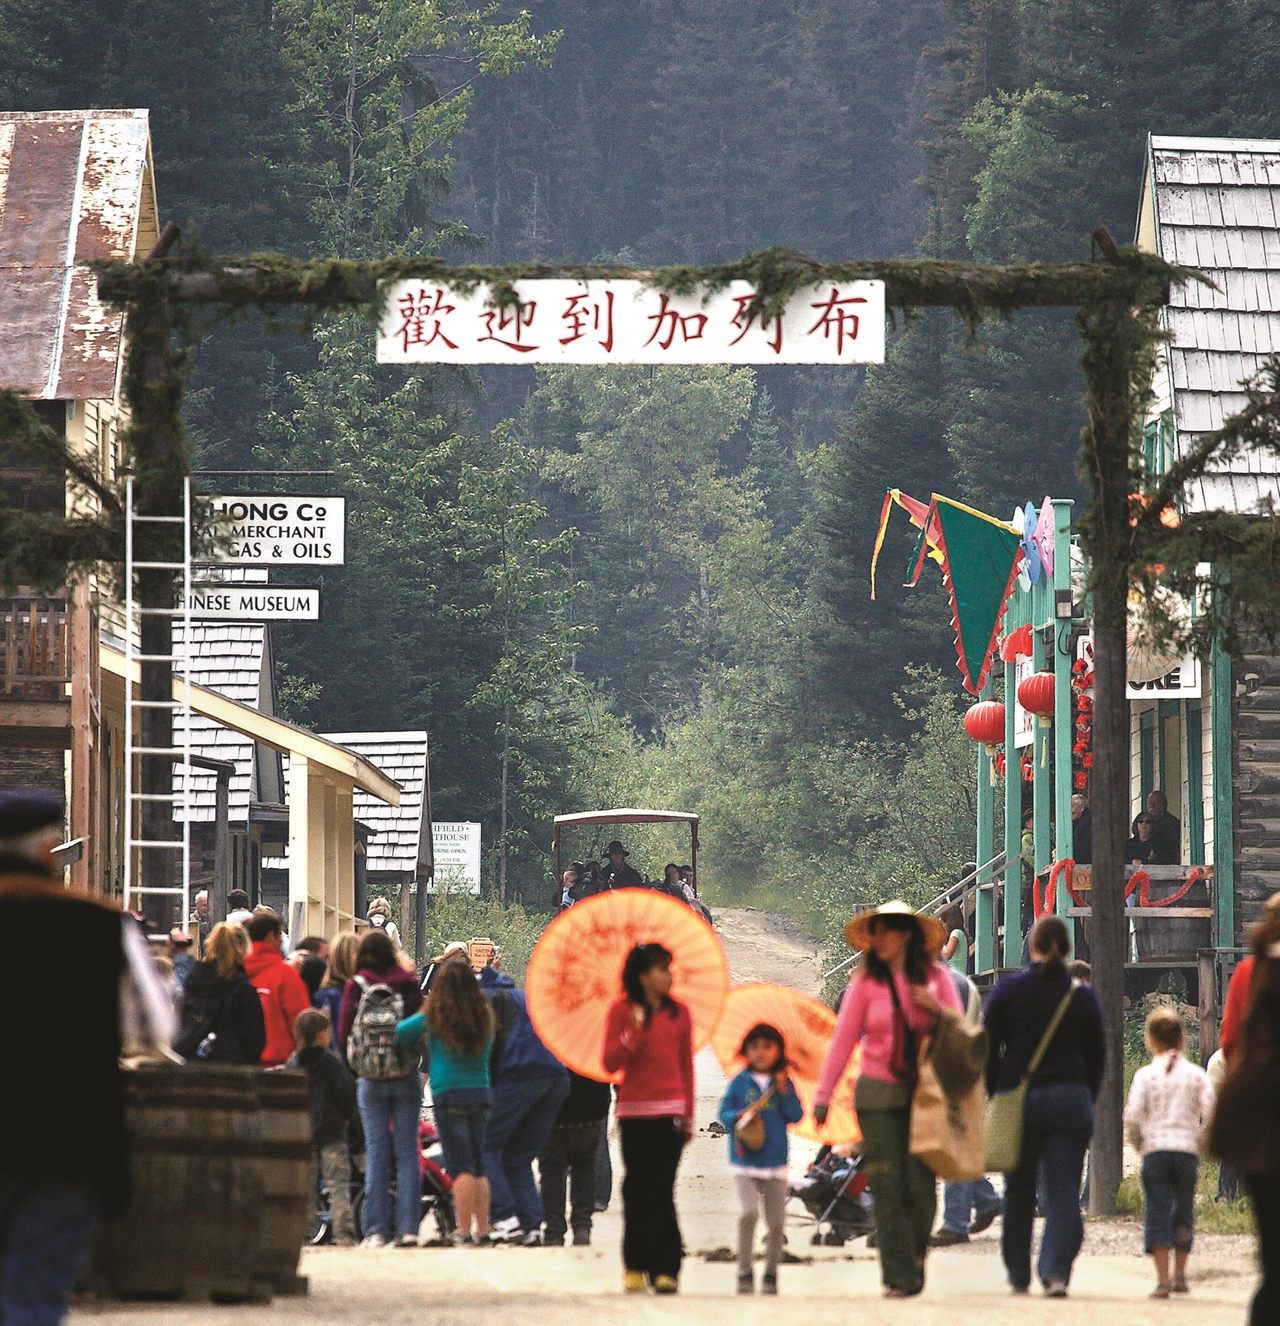 Today, Barkerville hosts cultural and educational events celebrating the history of British Columbia's Chinese community.